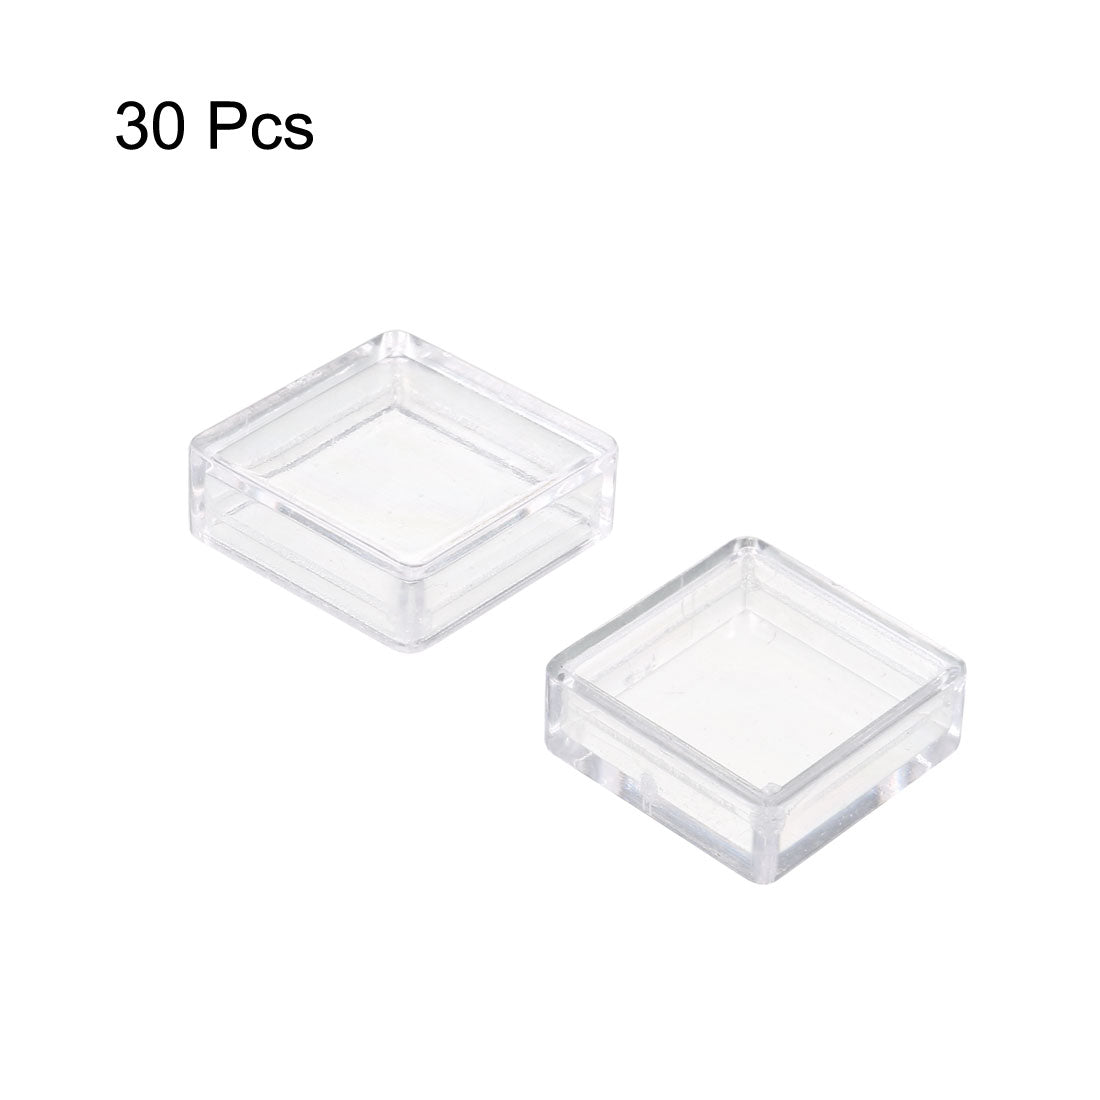 uxcell Uxcell 30Pcs 12x12mm Plastic Pushbutton Tact Switch Caps Cover Keycaps Transparent for A14 Tactile Switch